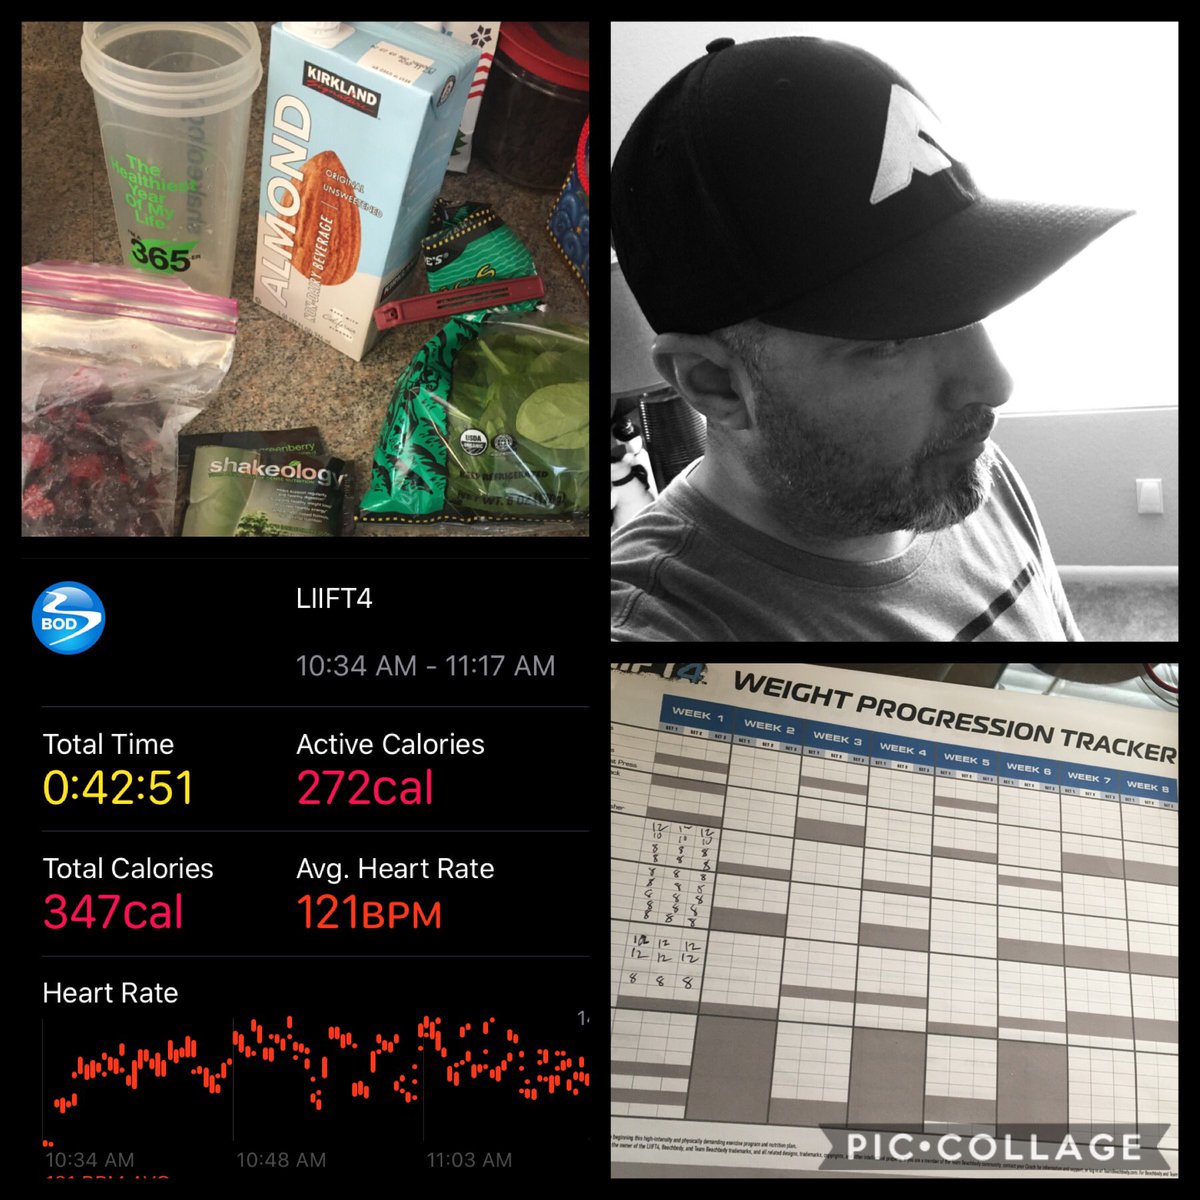 Day 1 of at home witness for this guy! Move even if it’s just small! Start somewhere and go! Let’s roll! #LIIFT4 #fitleaders @Beachbody @shakeology @AppleMusic @runandrant #ZeroApologyZone #dadsasprincipals